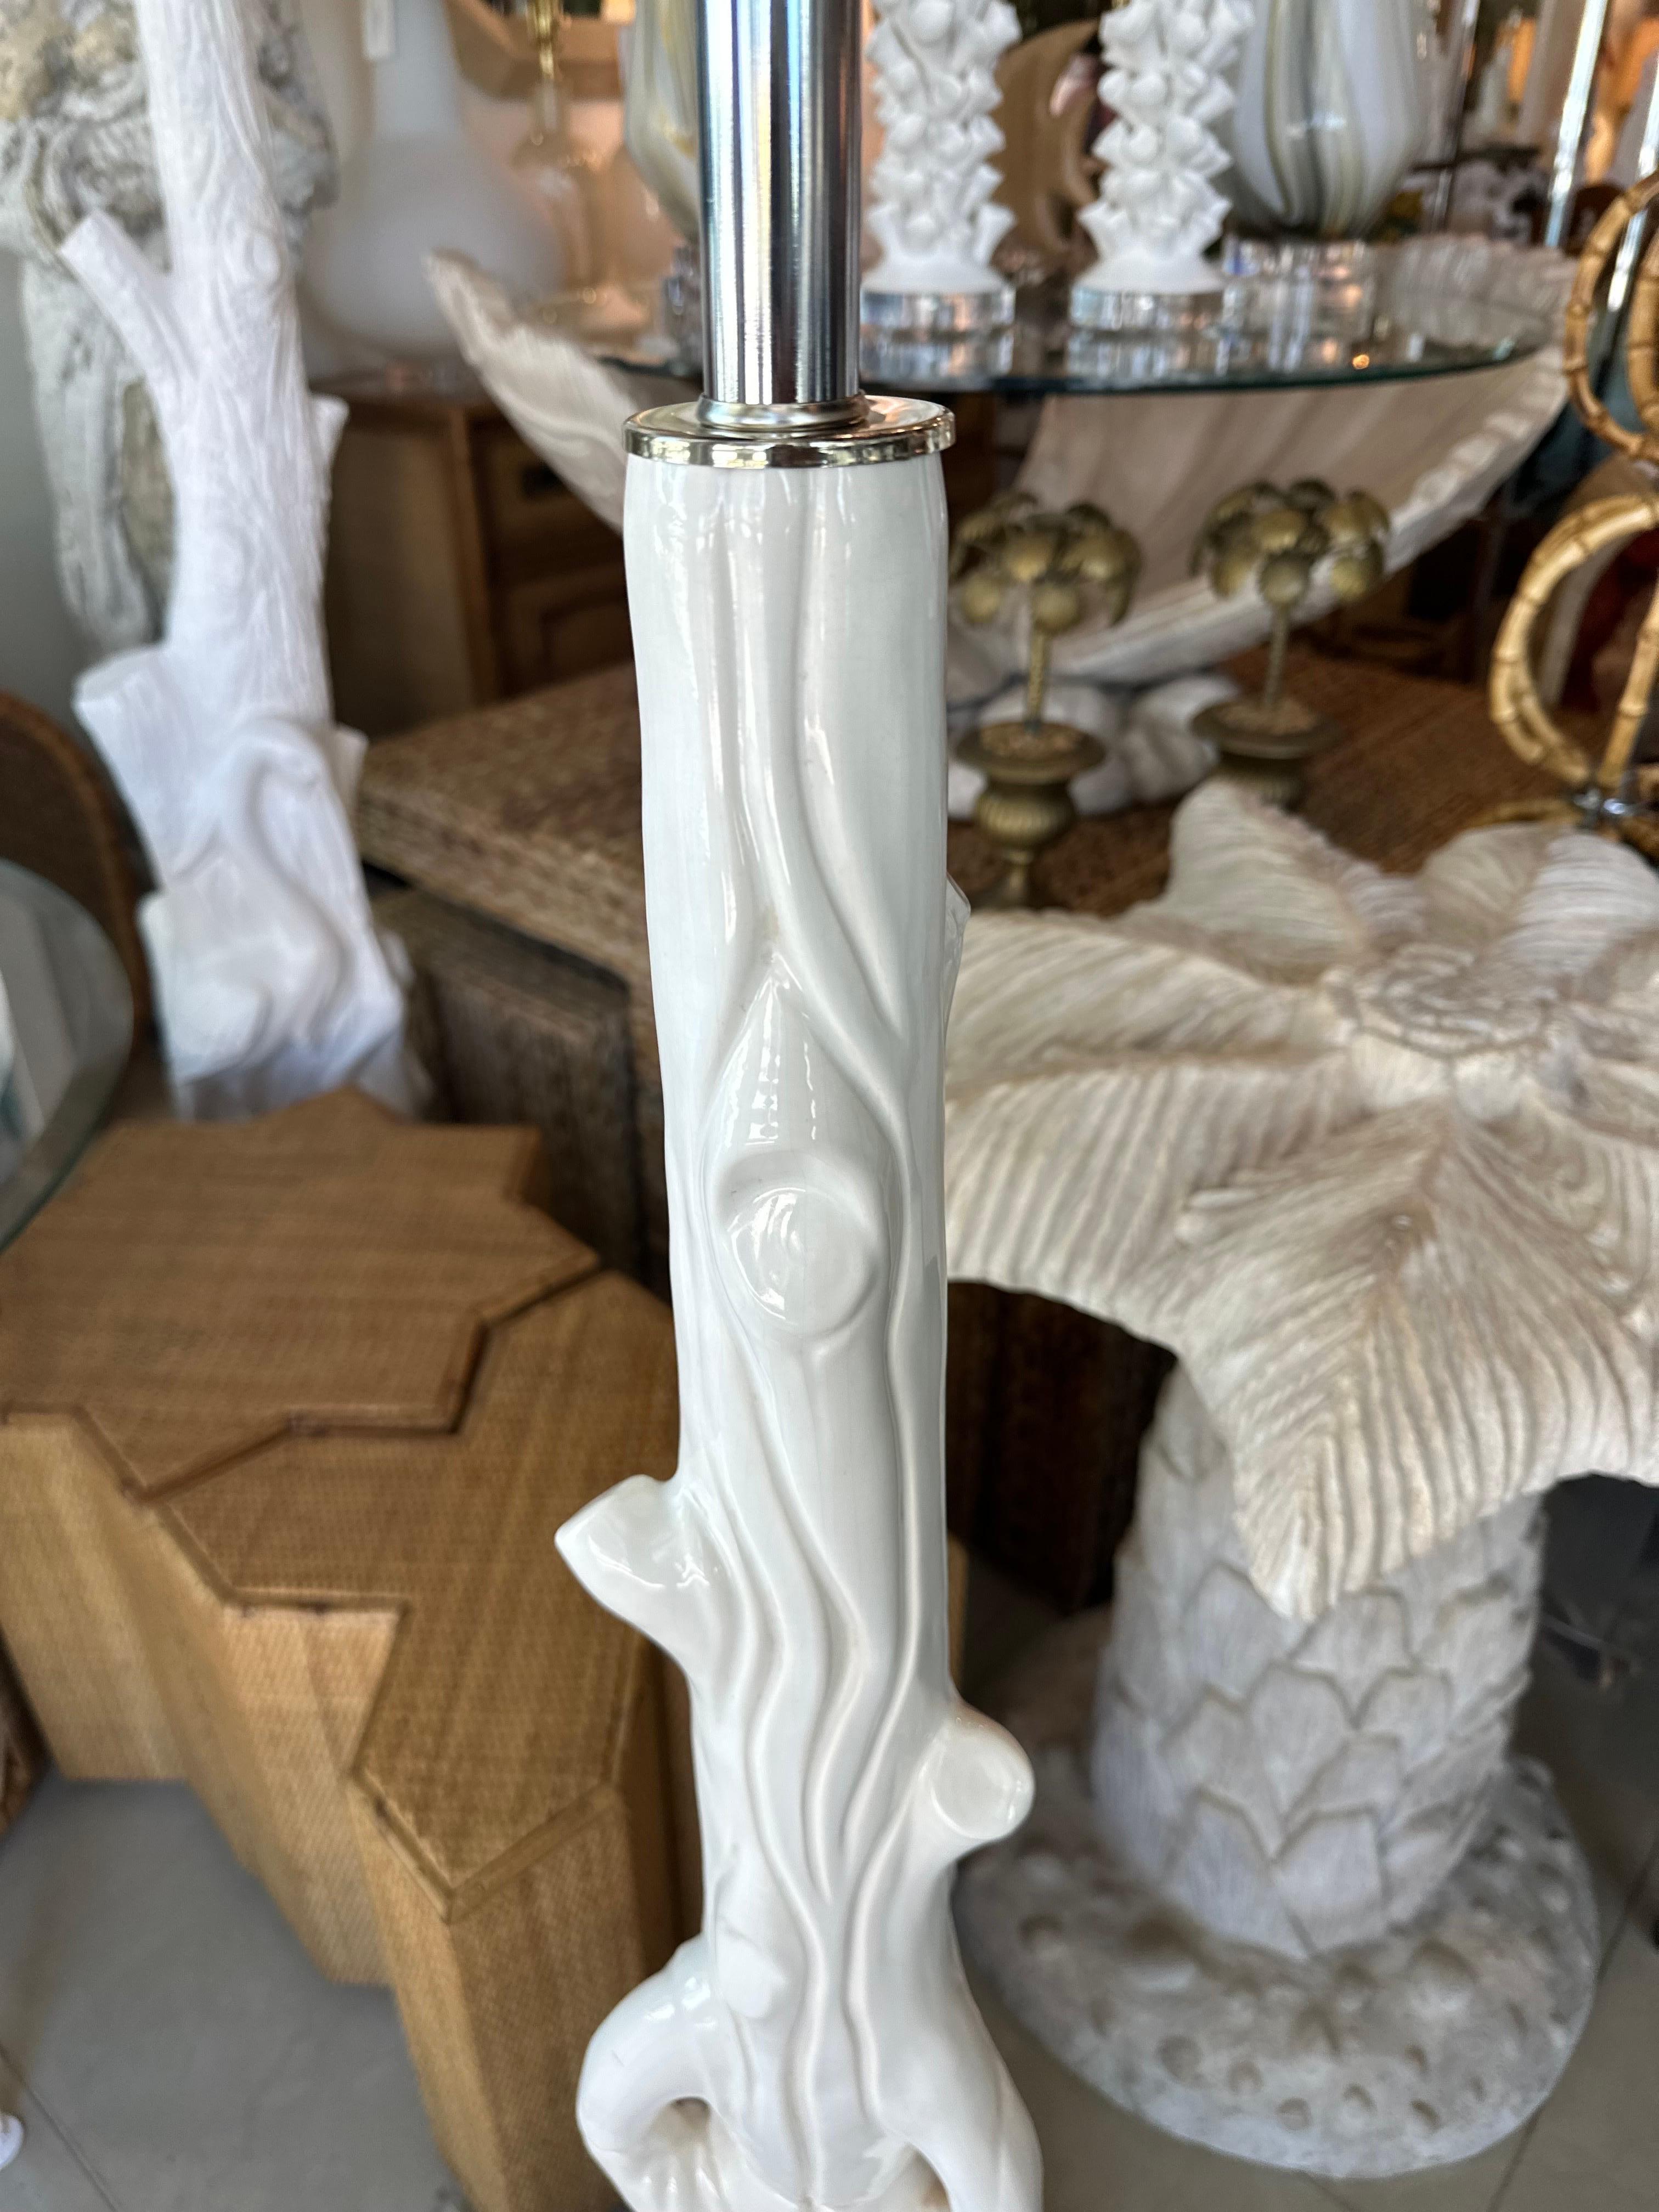 Vintage ceramic faux boise tree trunk floor lamp. This has been newly wired with 3 way sockets, all nickel hardware. The wood base has been lacquered in a fresh white. Dimensions: 56 H (to top of finial) x 49.5 H (to top of socket) x 16 D. If you